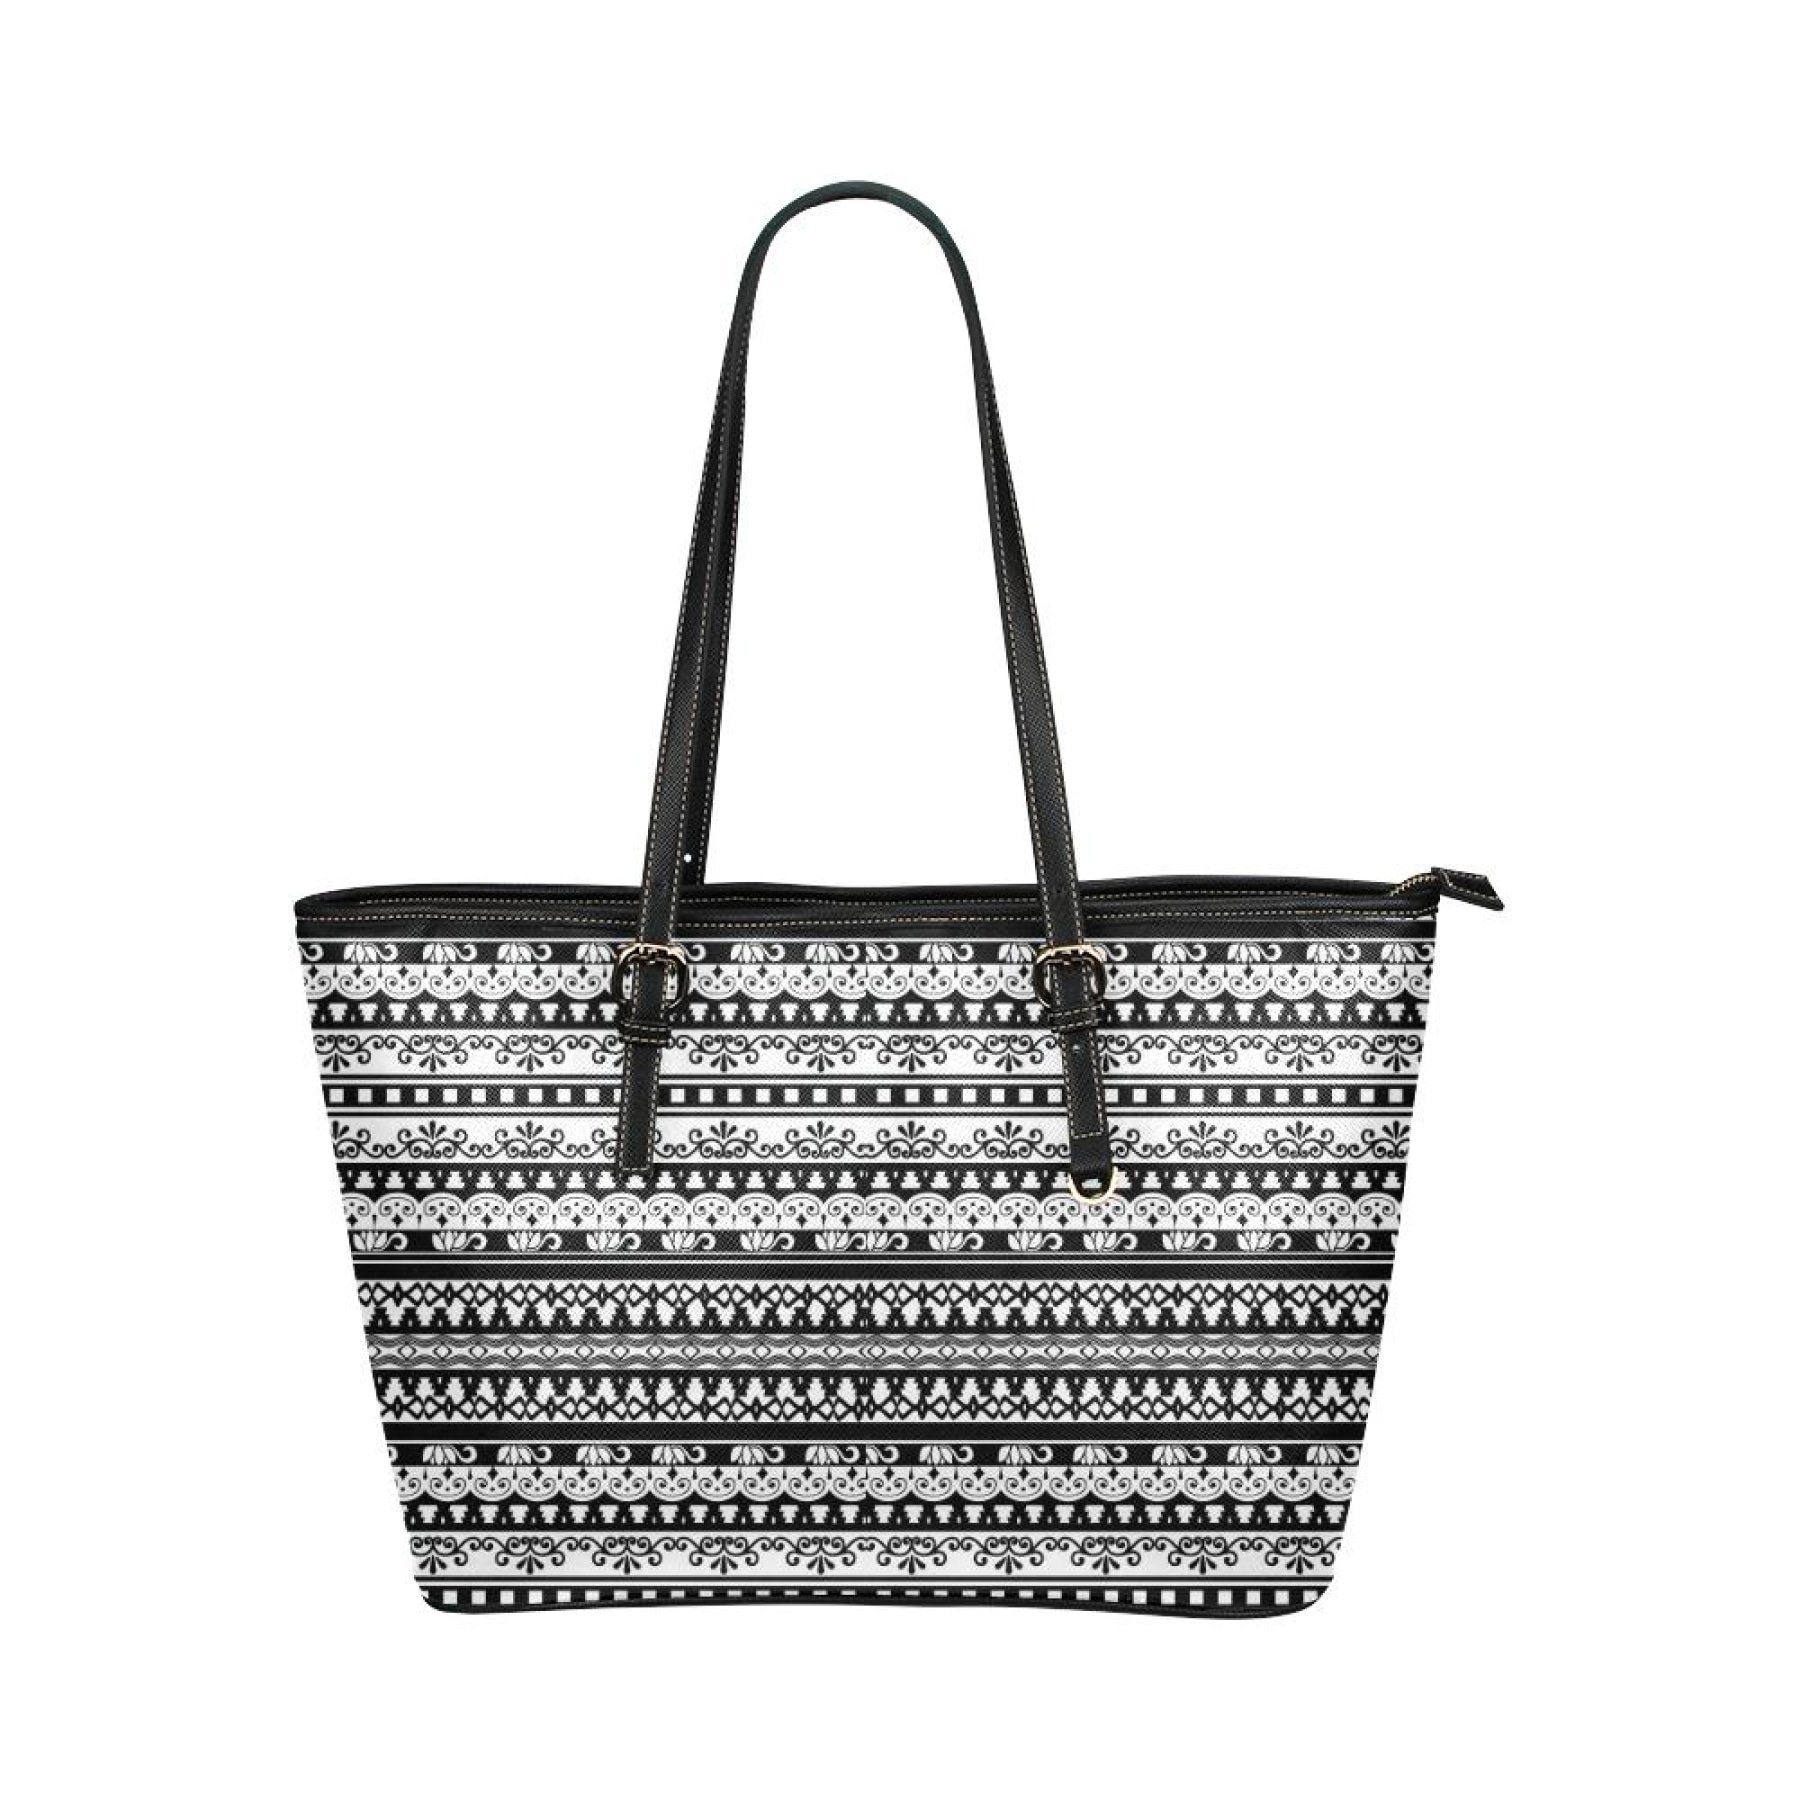 Black And White Vintage Style Leather Tote Bag 7